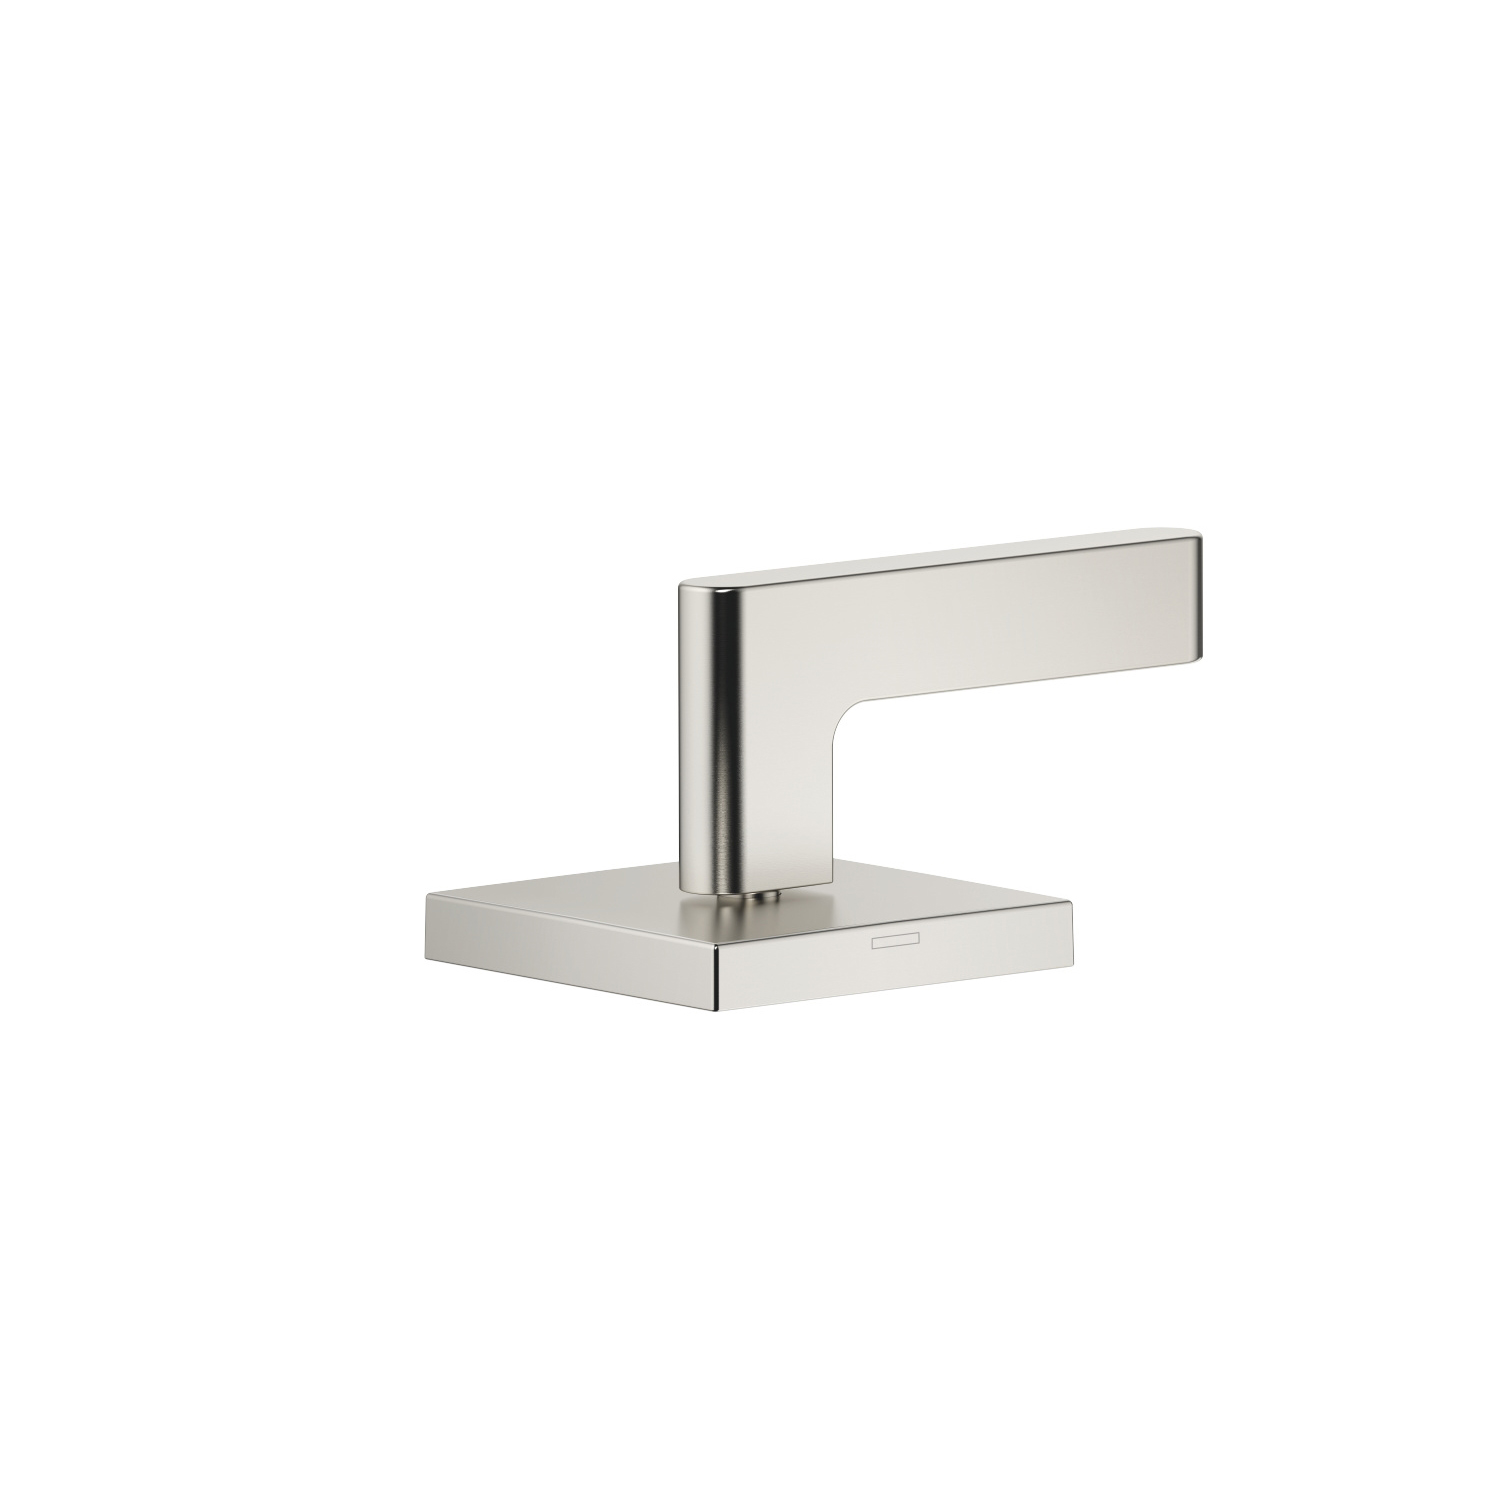 CL.1 Deck Mounted Thermostatic Valve-Hot In Platinum Matte